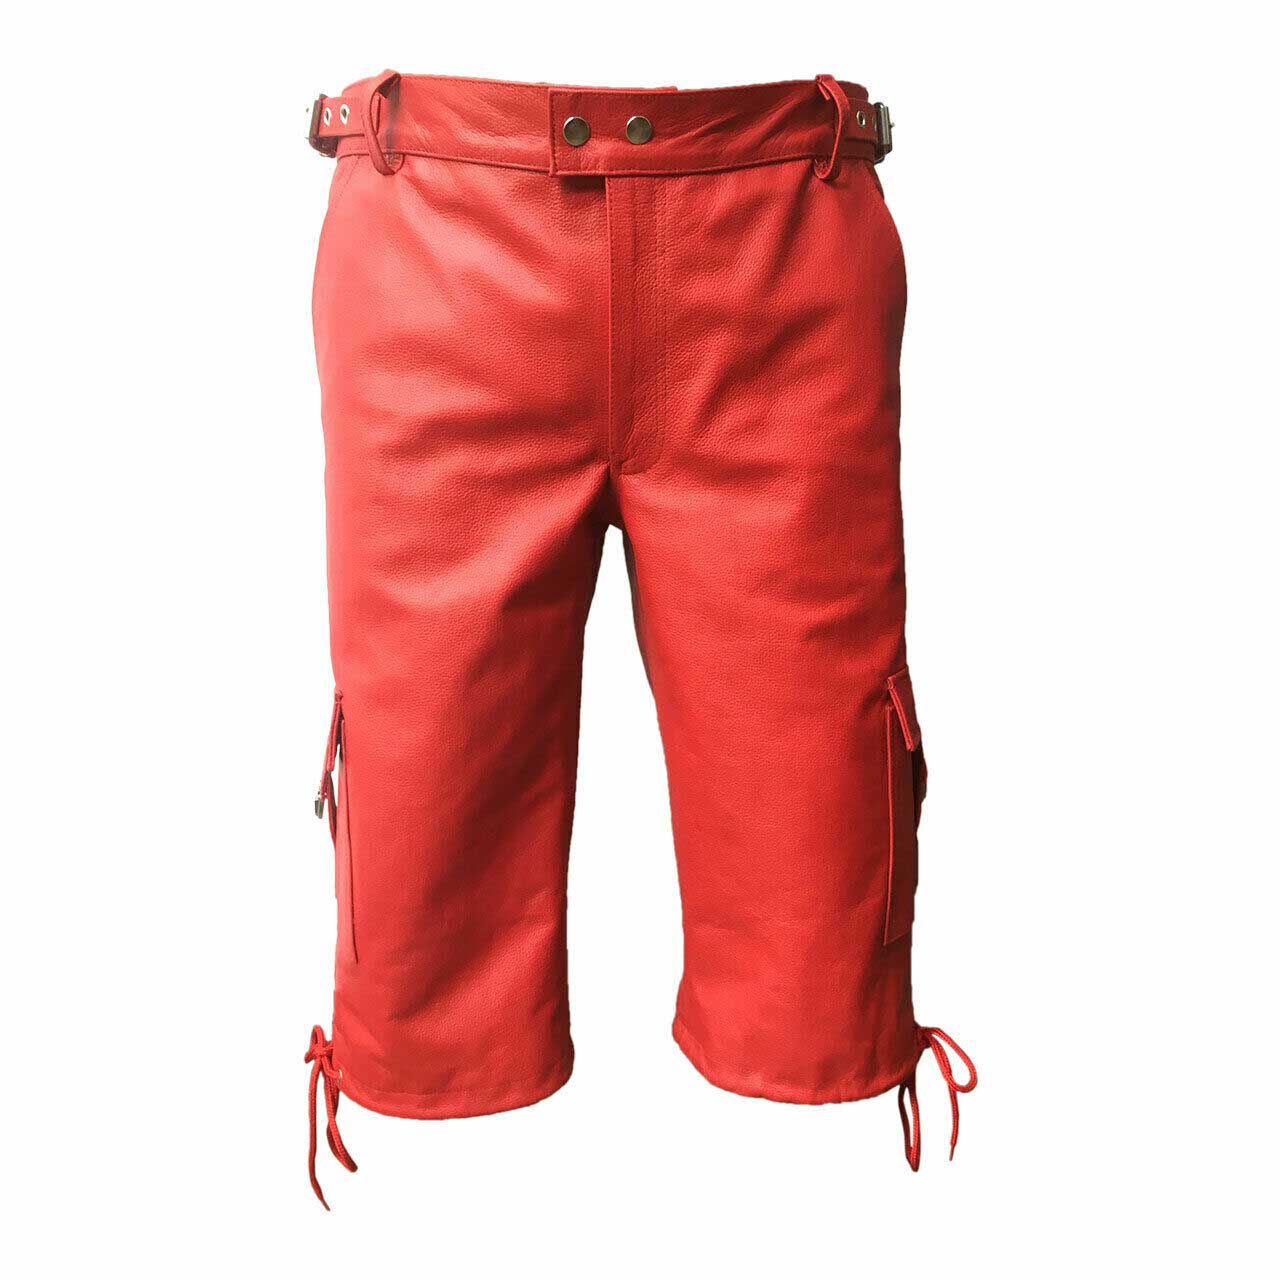 MENS COMBAT CARGO SHORTS GENUINE RED LEATHER - CARGO1 - RED